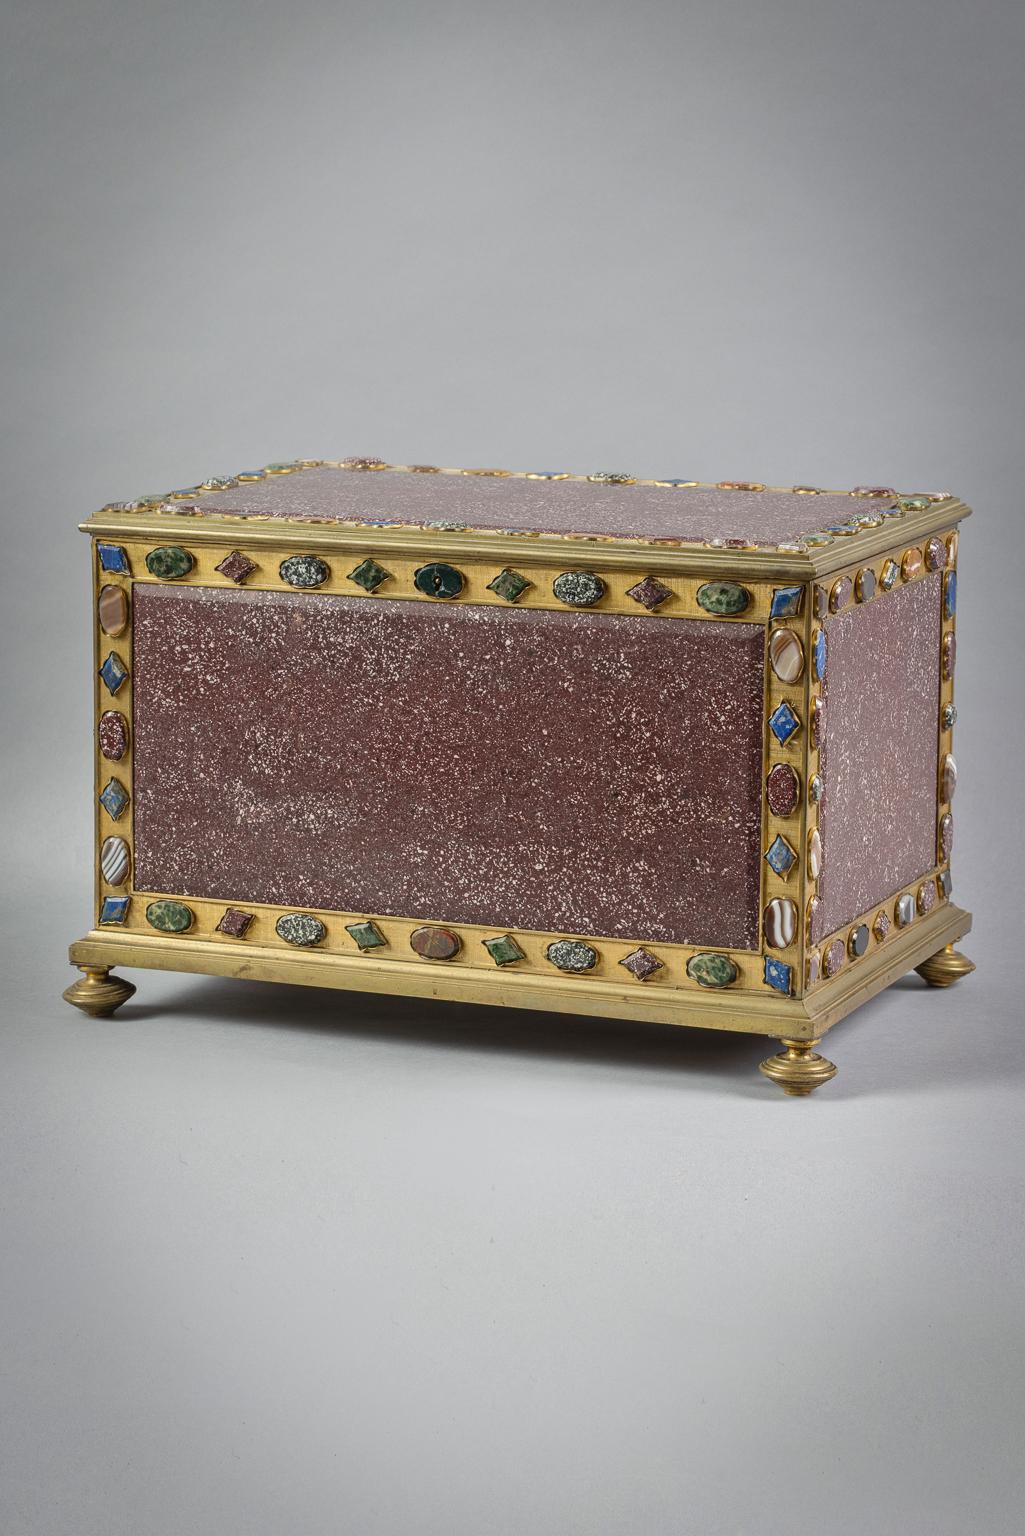 The borders of the casket are mounted with varied stones including marble, agate and porphyry.

Offered with a letter on the stationery of George W. Funk, dealers of Italian and Spanish Antiques, 854 Lexington Ave. New York, and dated December 2,